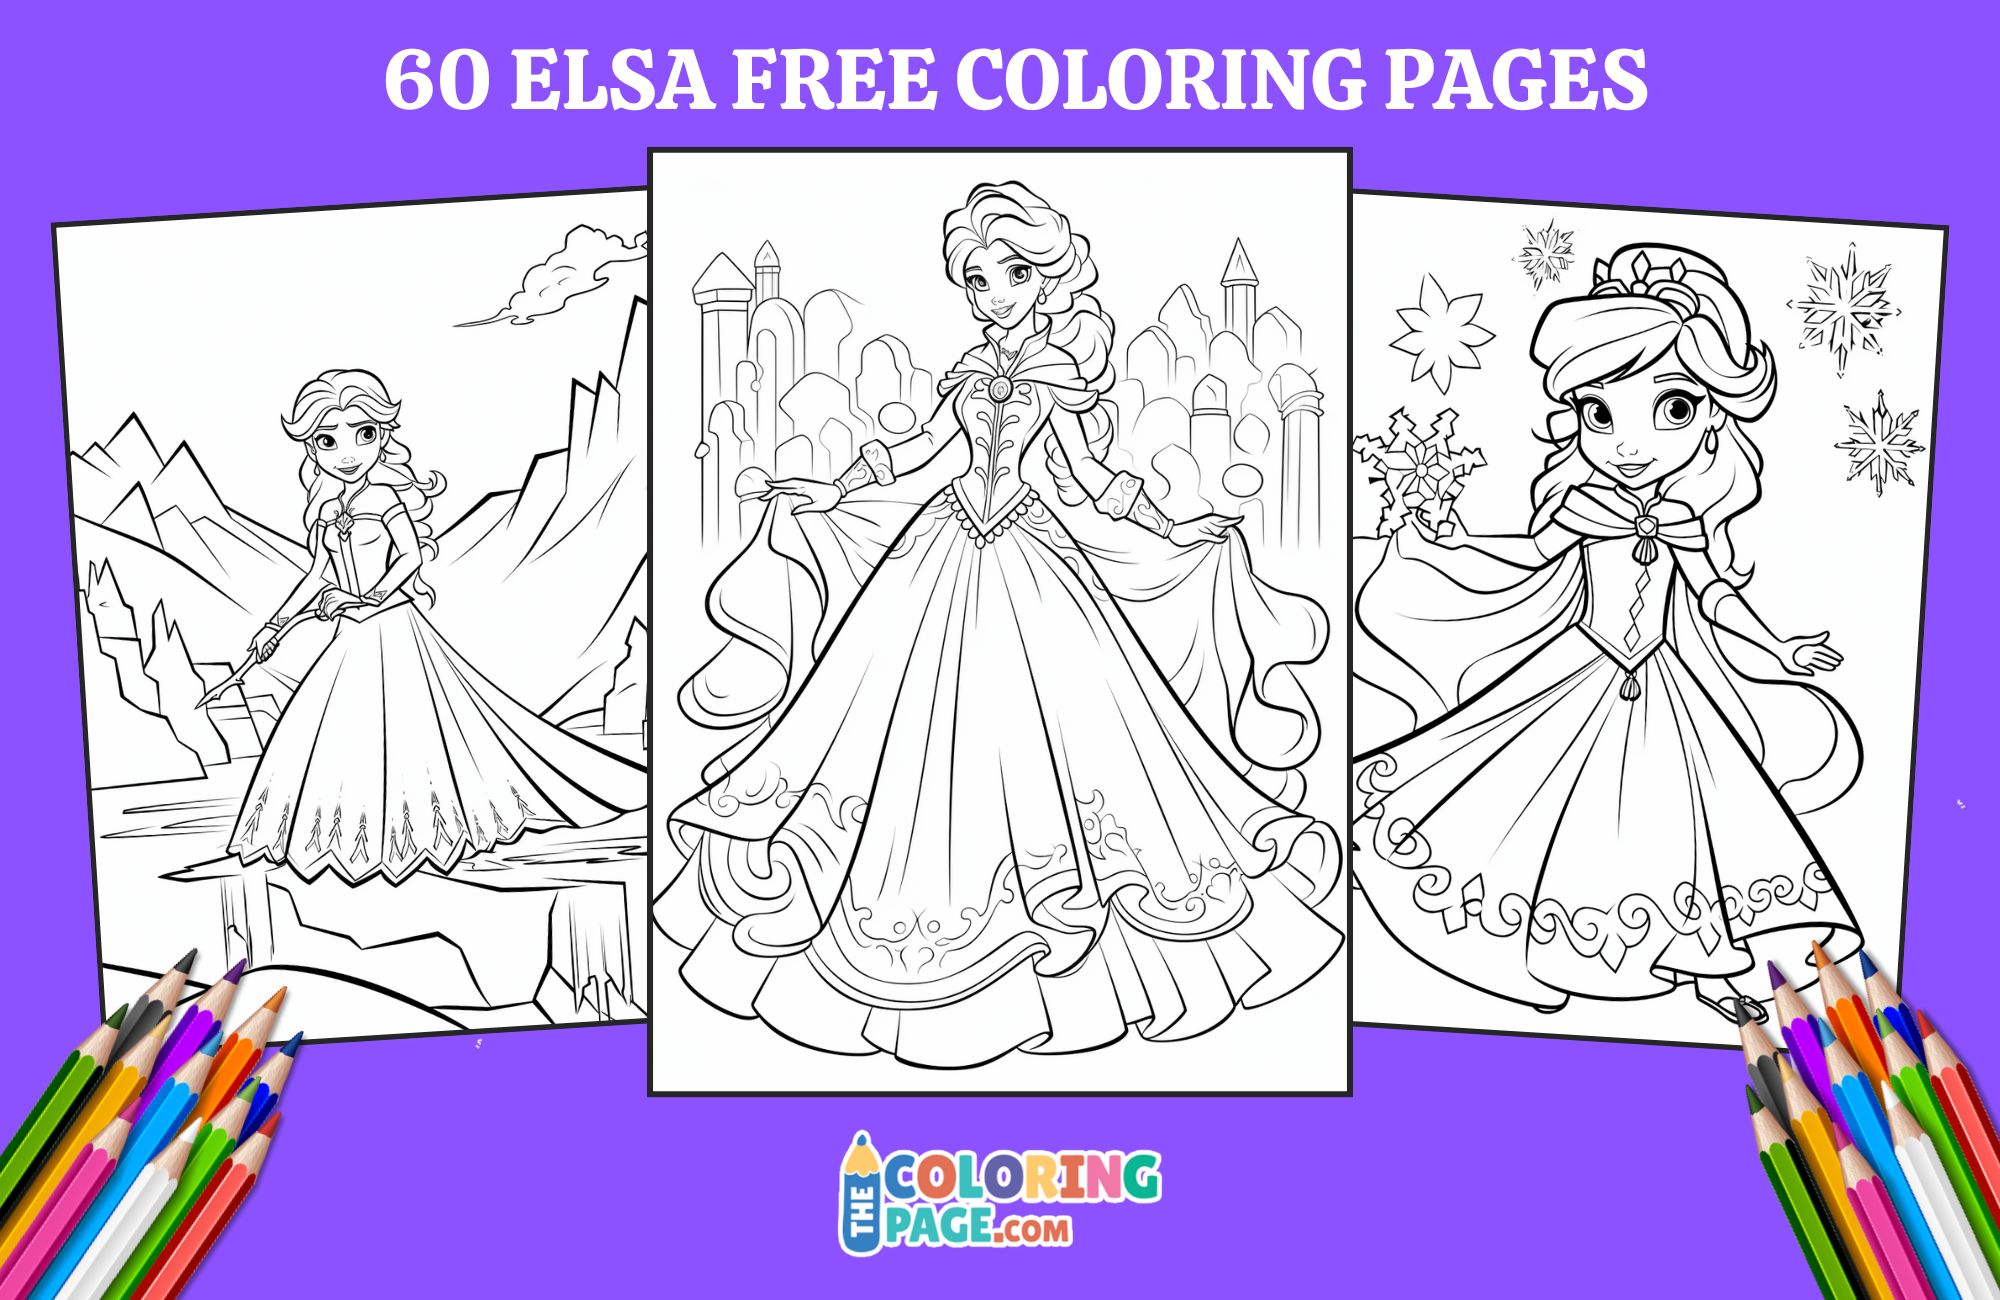 60 Elsa Coloring Pages for kids